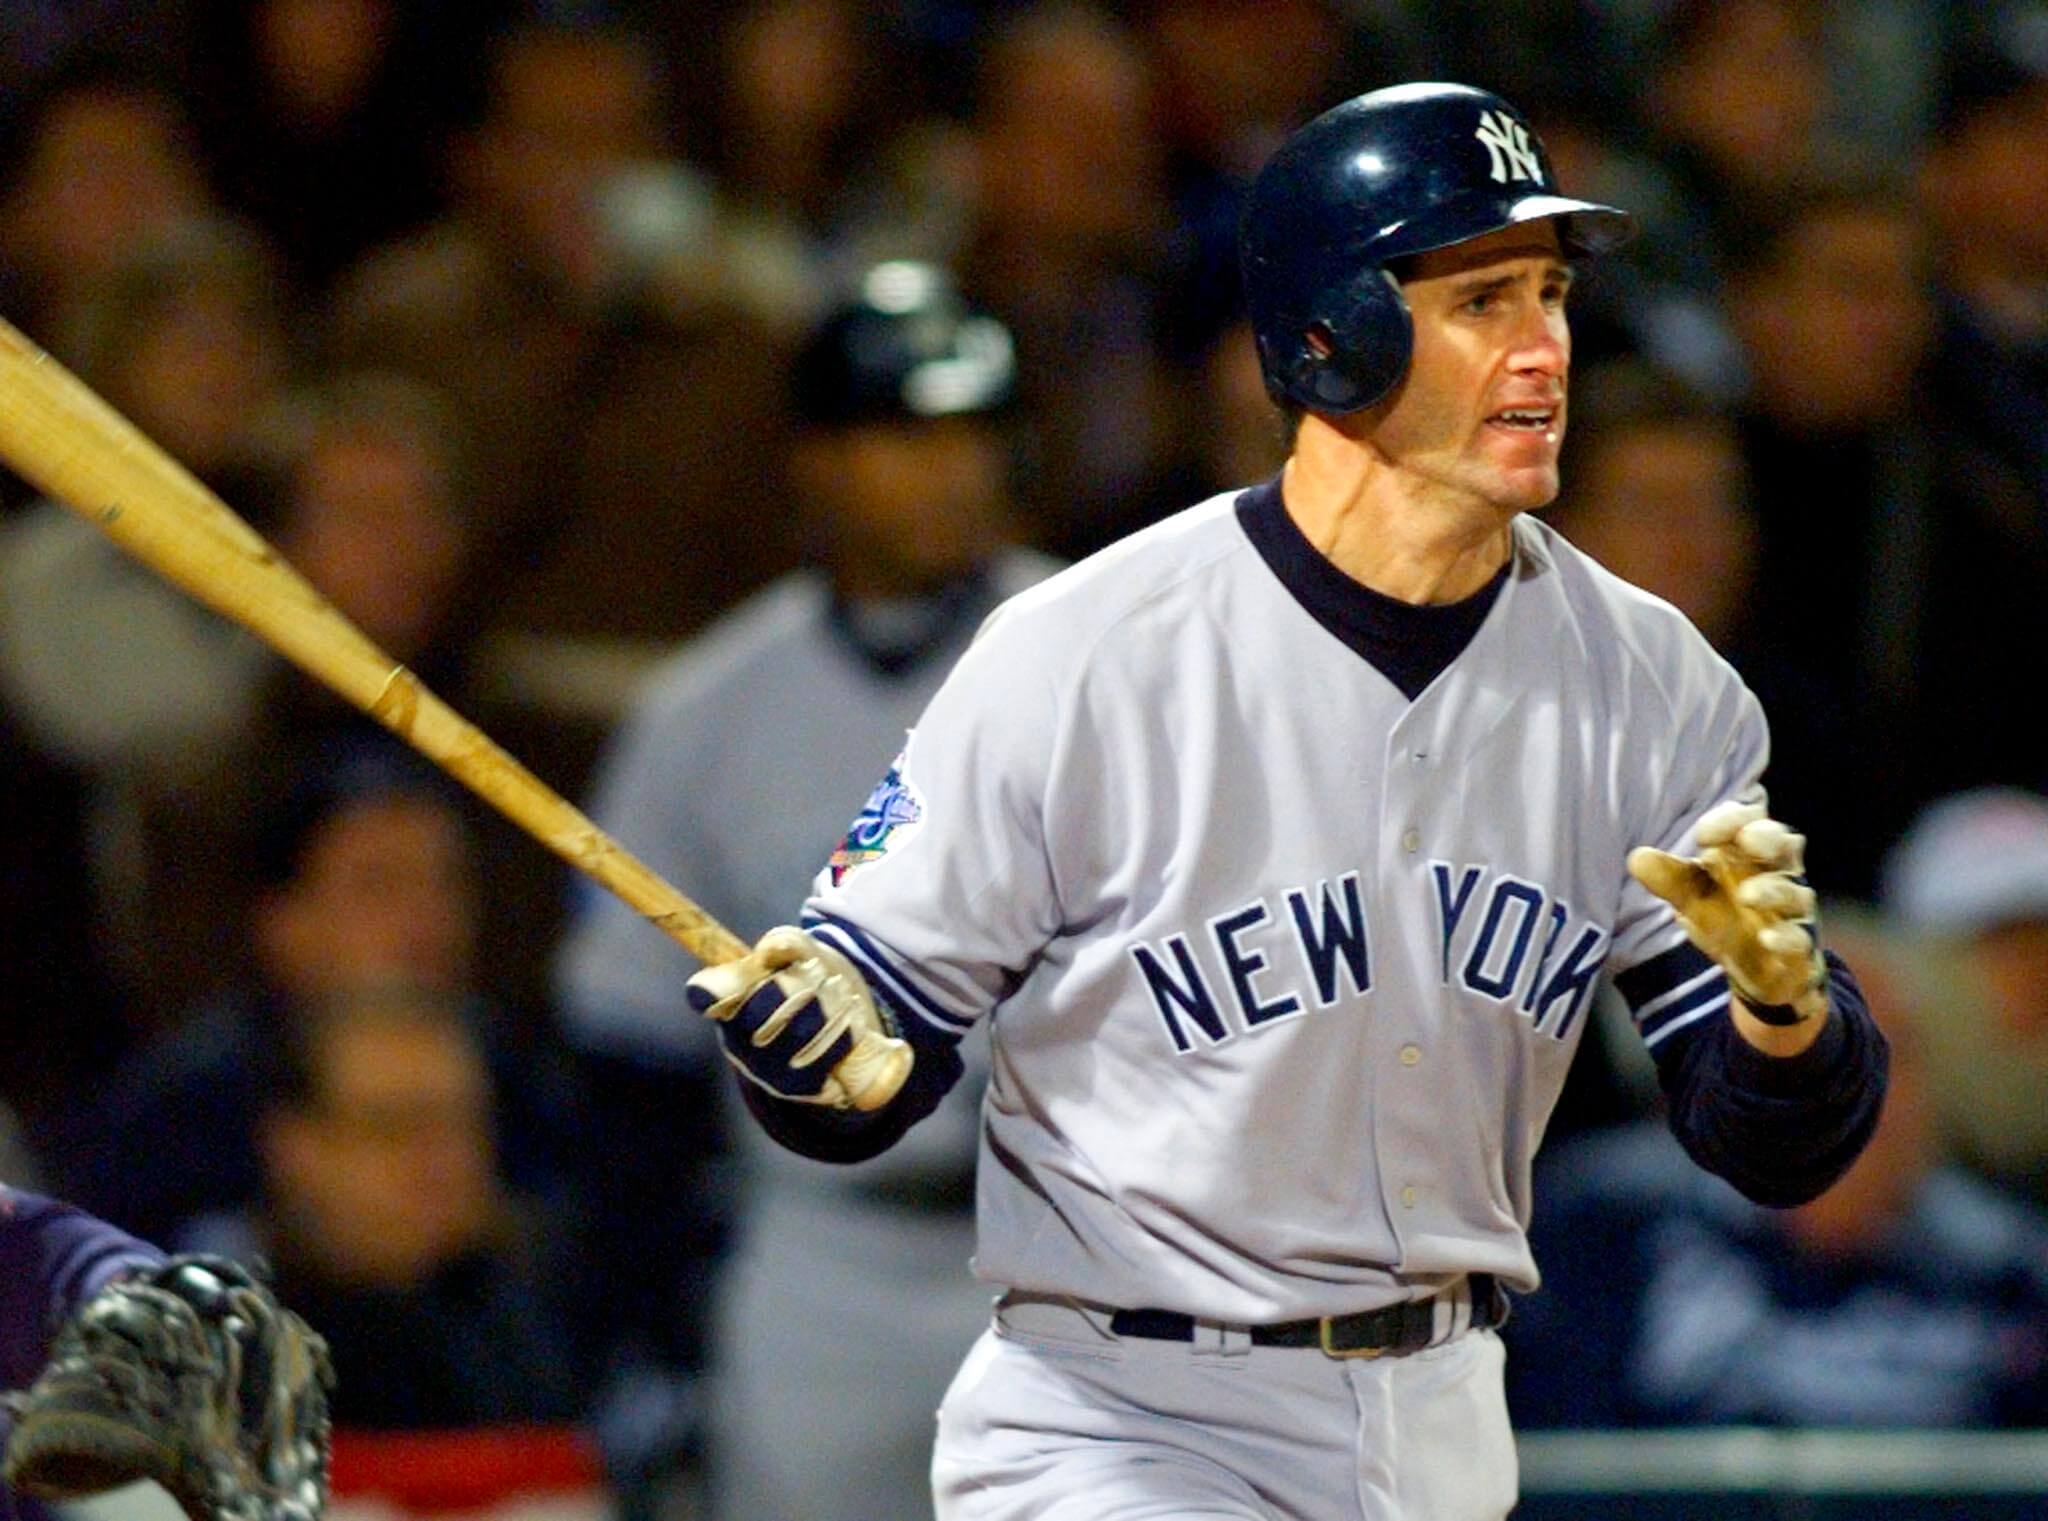 Yankees to retire Paul O'Neill's No. 21 jersey this summer - Newsday